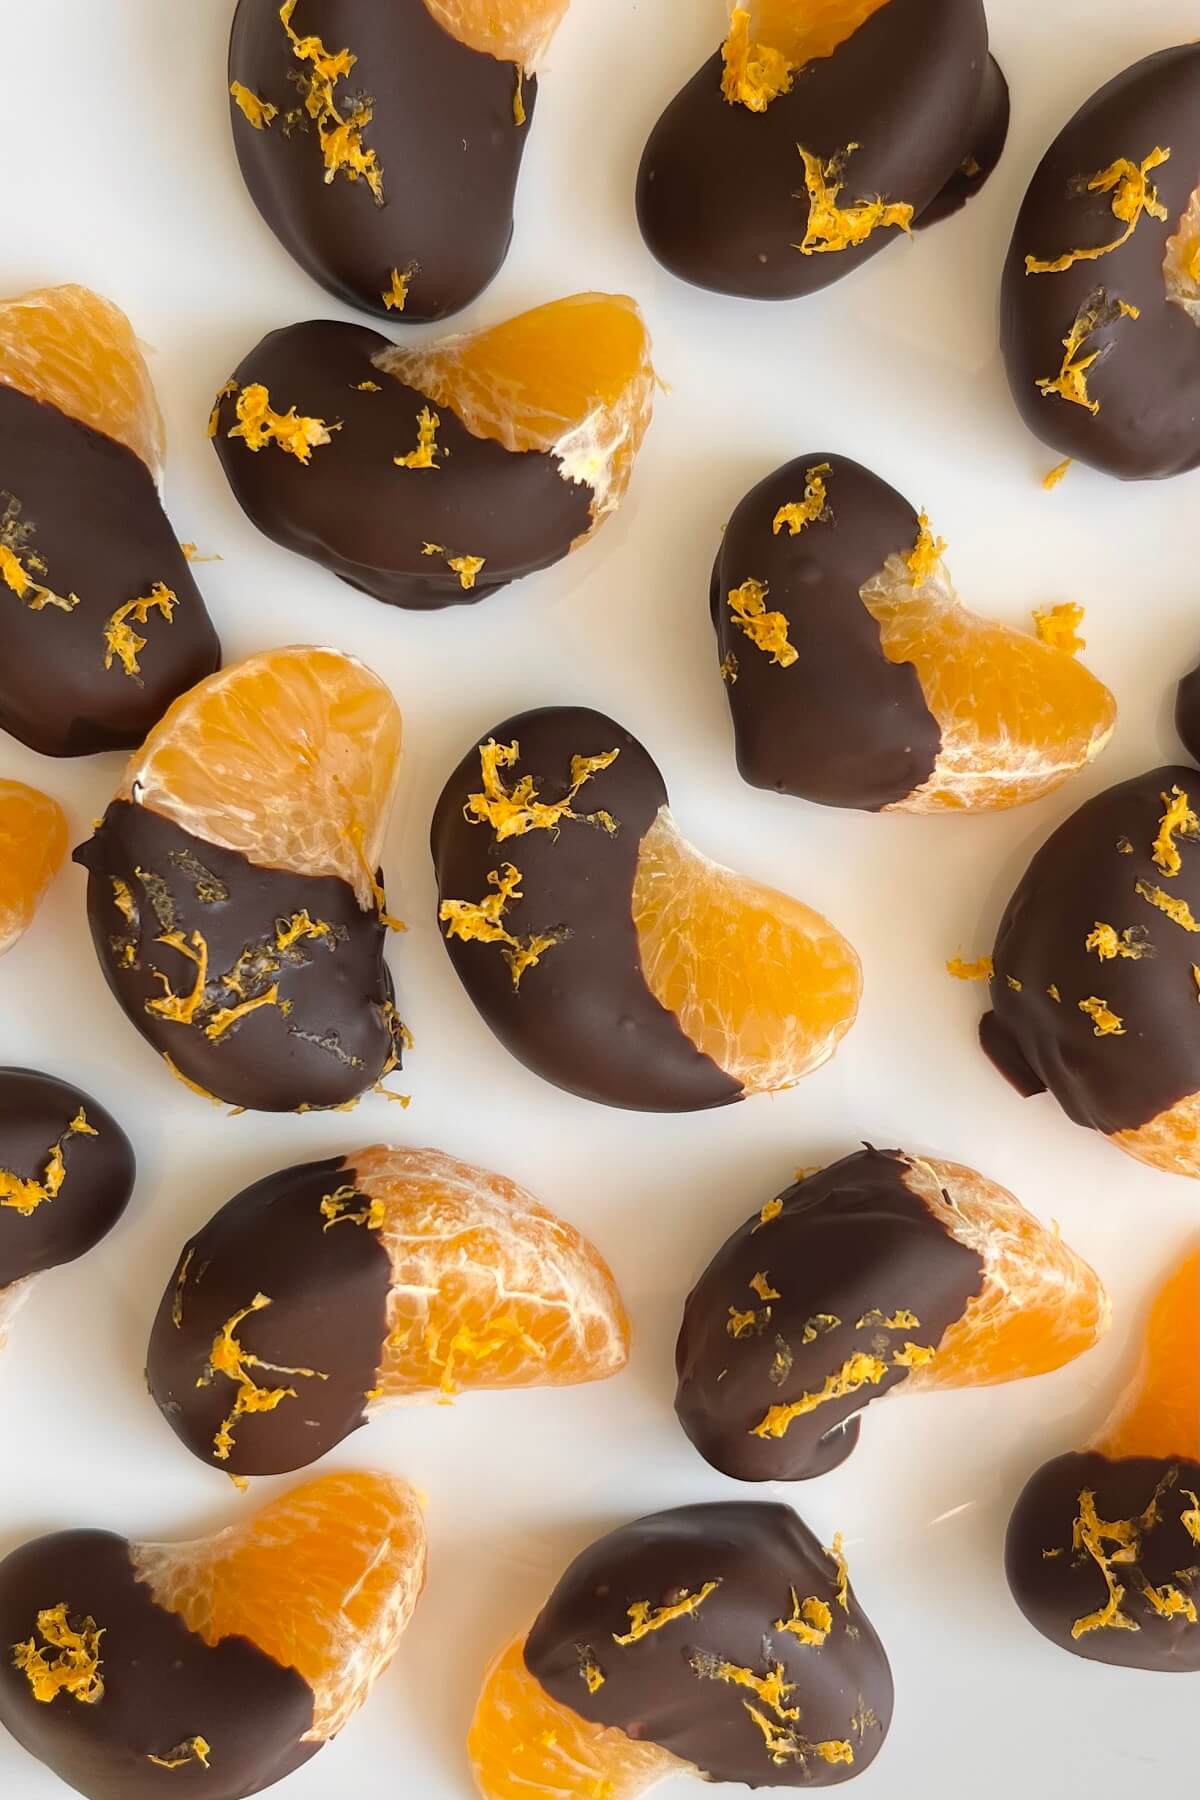 Chocolate covered clementine orange segments on a white plate.